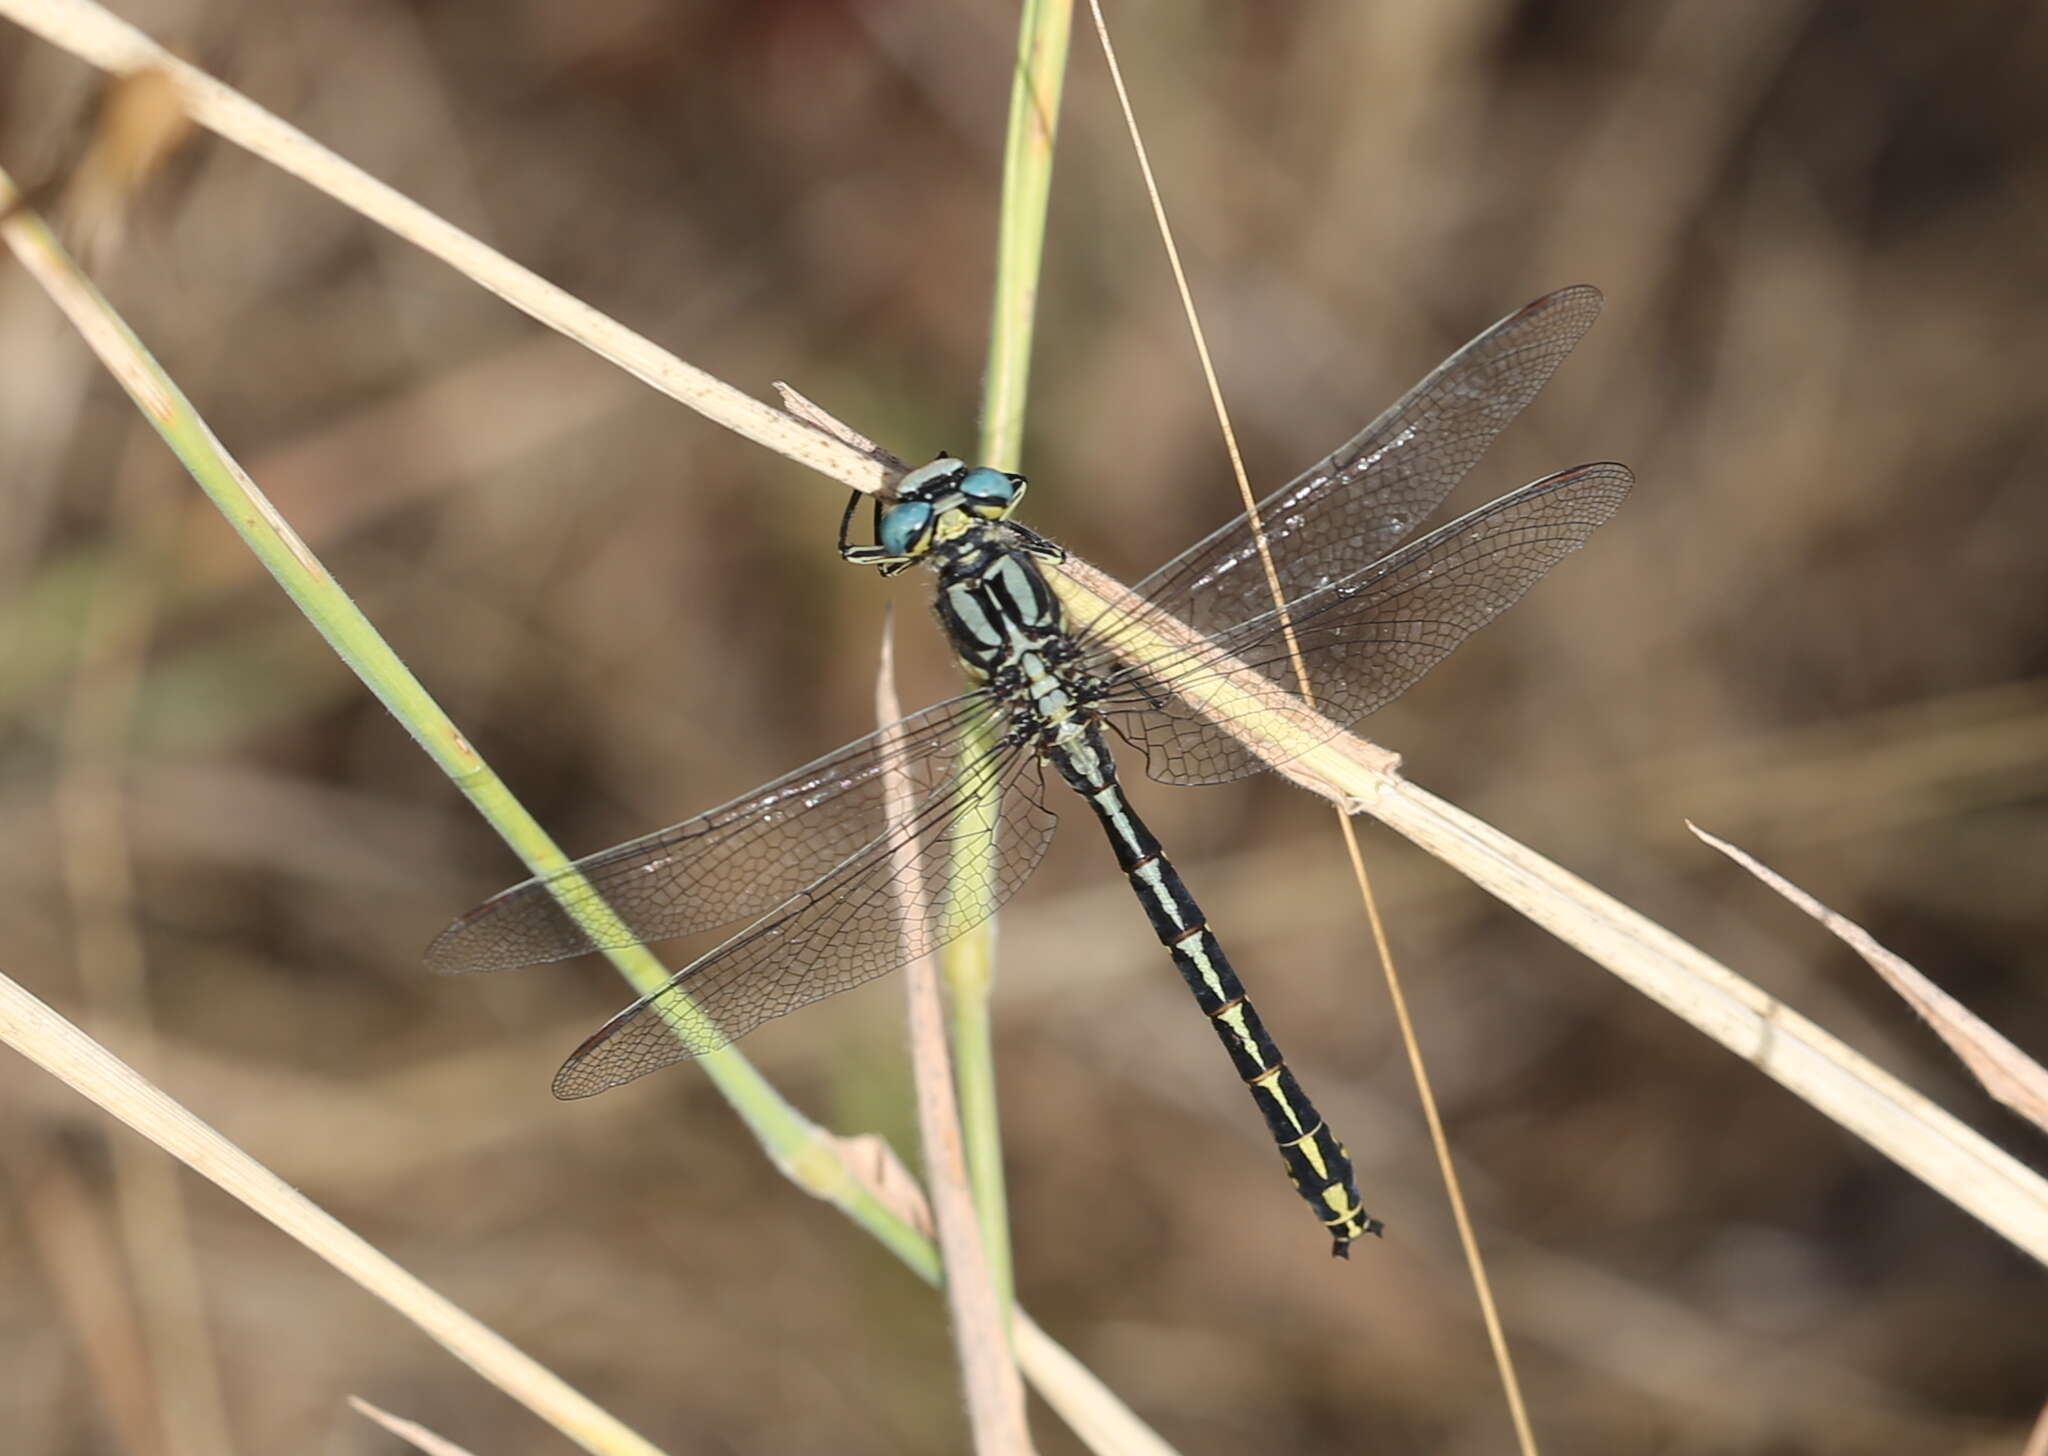 Image of Pronged Clubtail